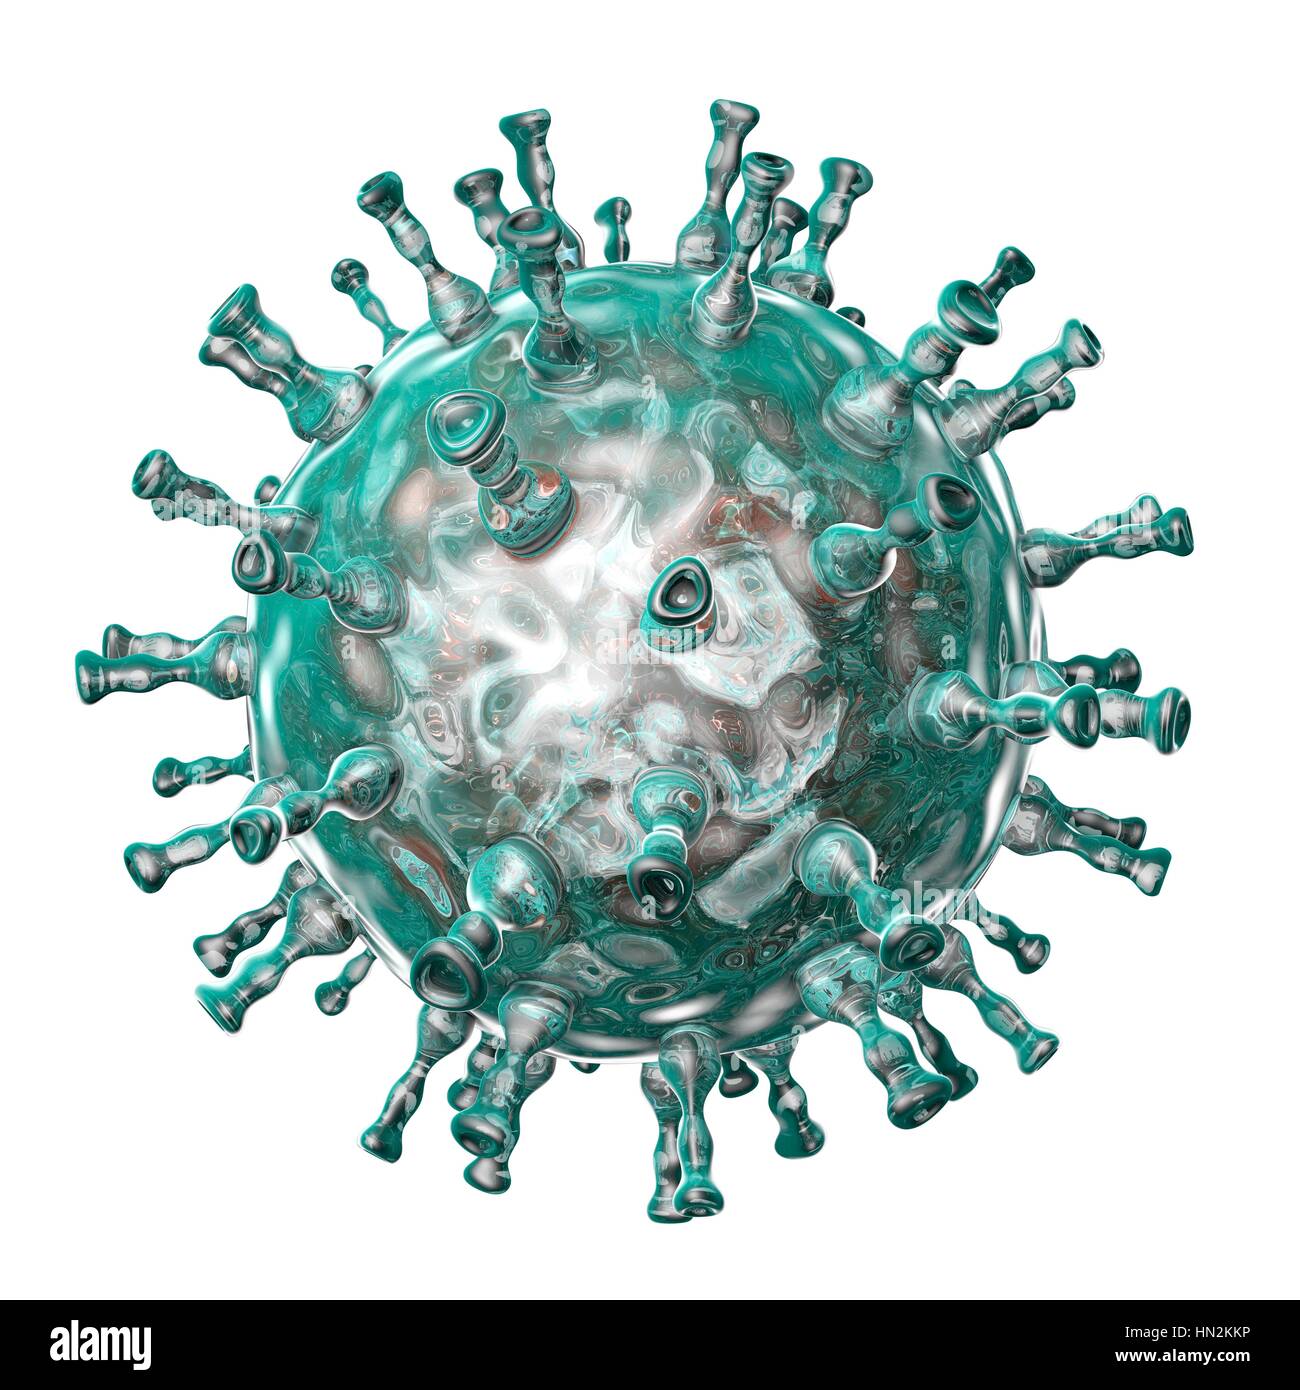 Computer illustration of a varicella zoster virus particle, the cause of chickenpox and shingles. Varicella zoster virus is also known as human herpes virus type 3 (HHV-3). Stock Photo